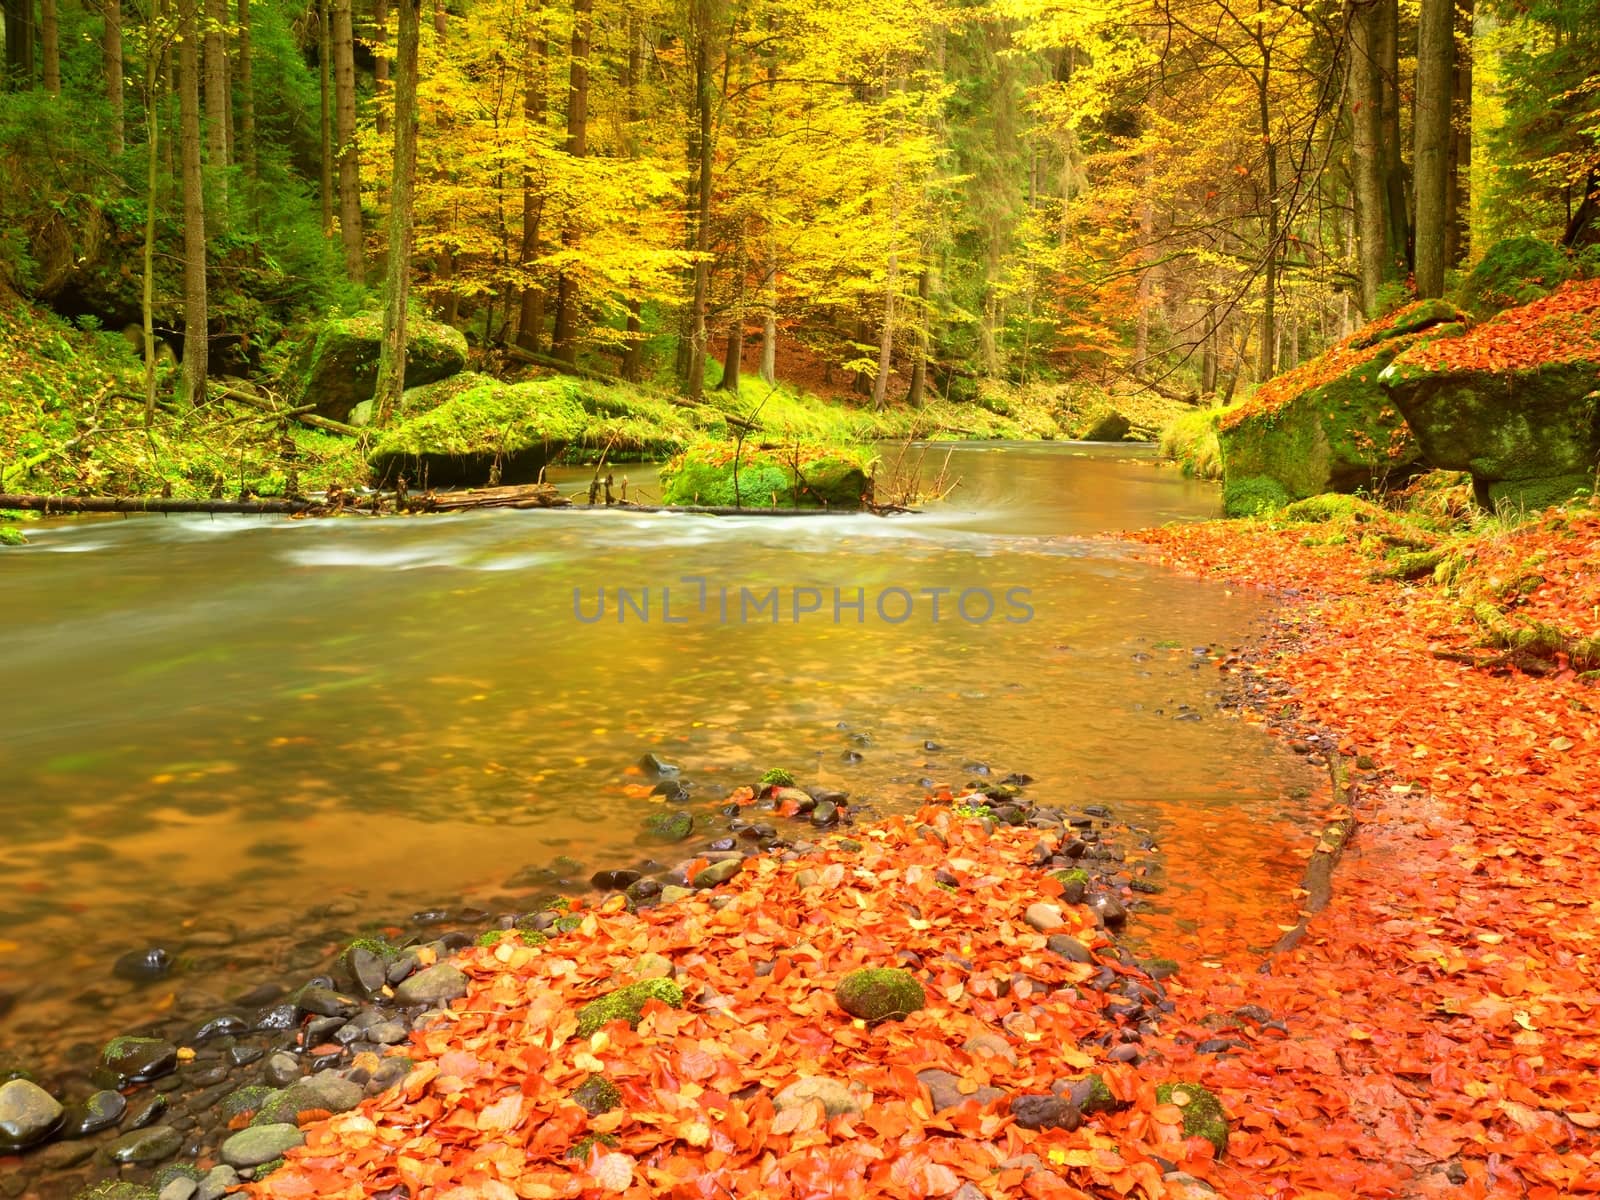 Fall at mountain river. Low level of water, gravel with vivid colorful leaves. Mossy boulder by rdonar2